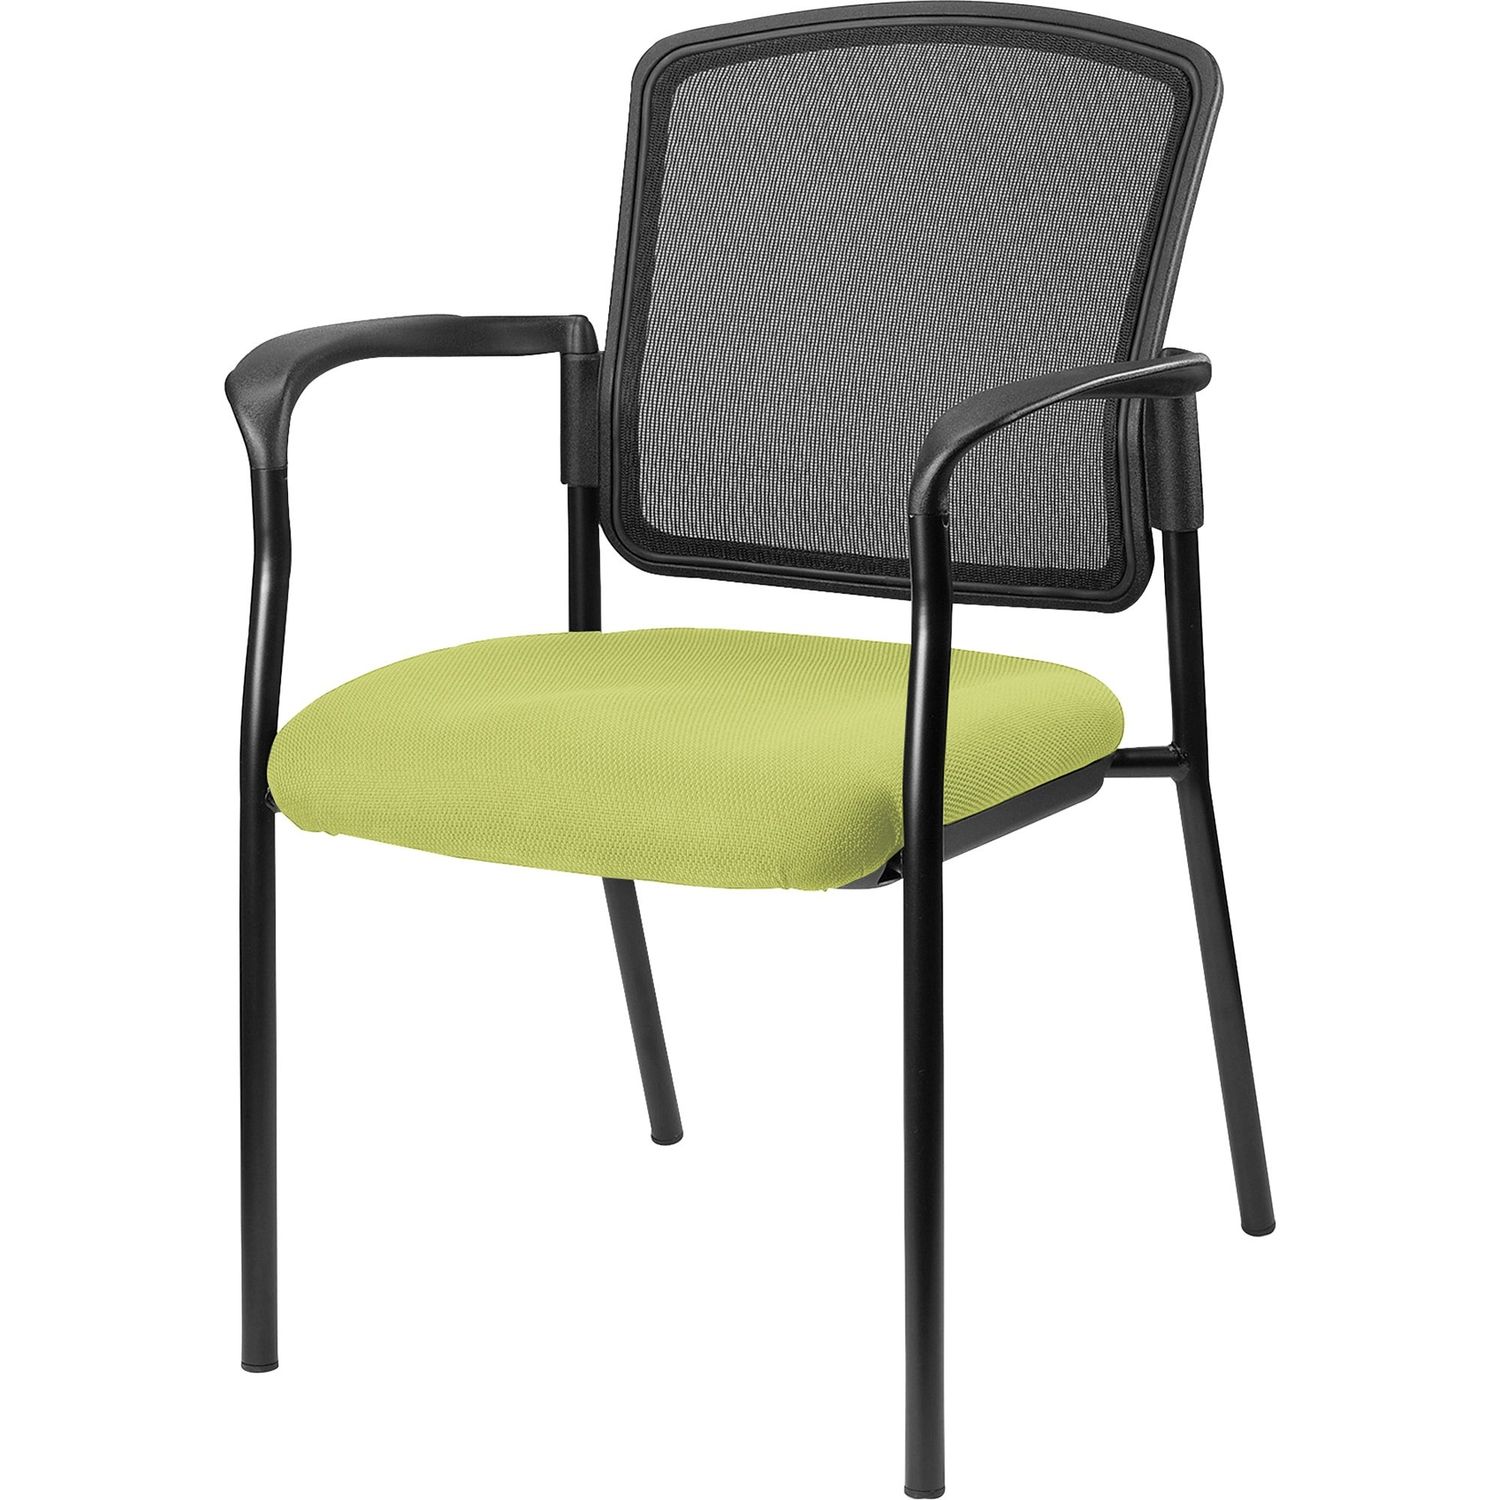 Mesh Back Guest Chair Fabric Seat, Black Powder Coated Steel Frame, Green, Apple Green, 1 Each